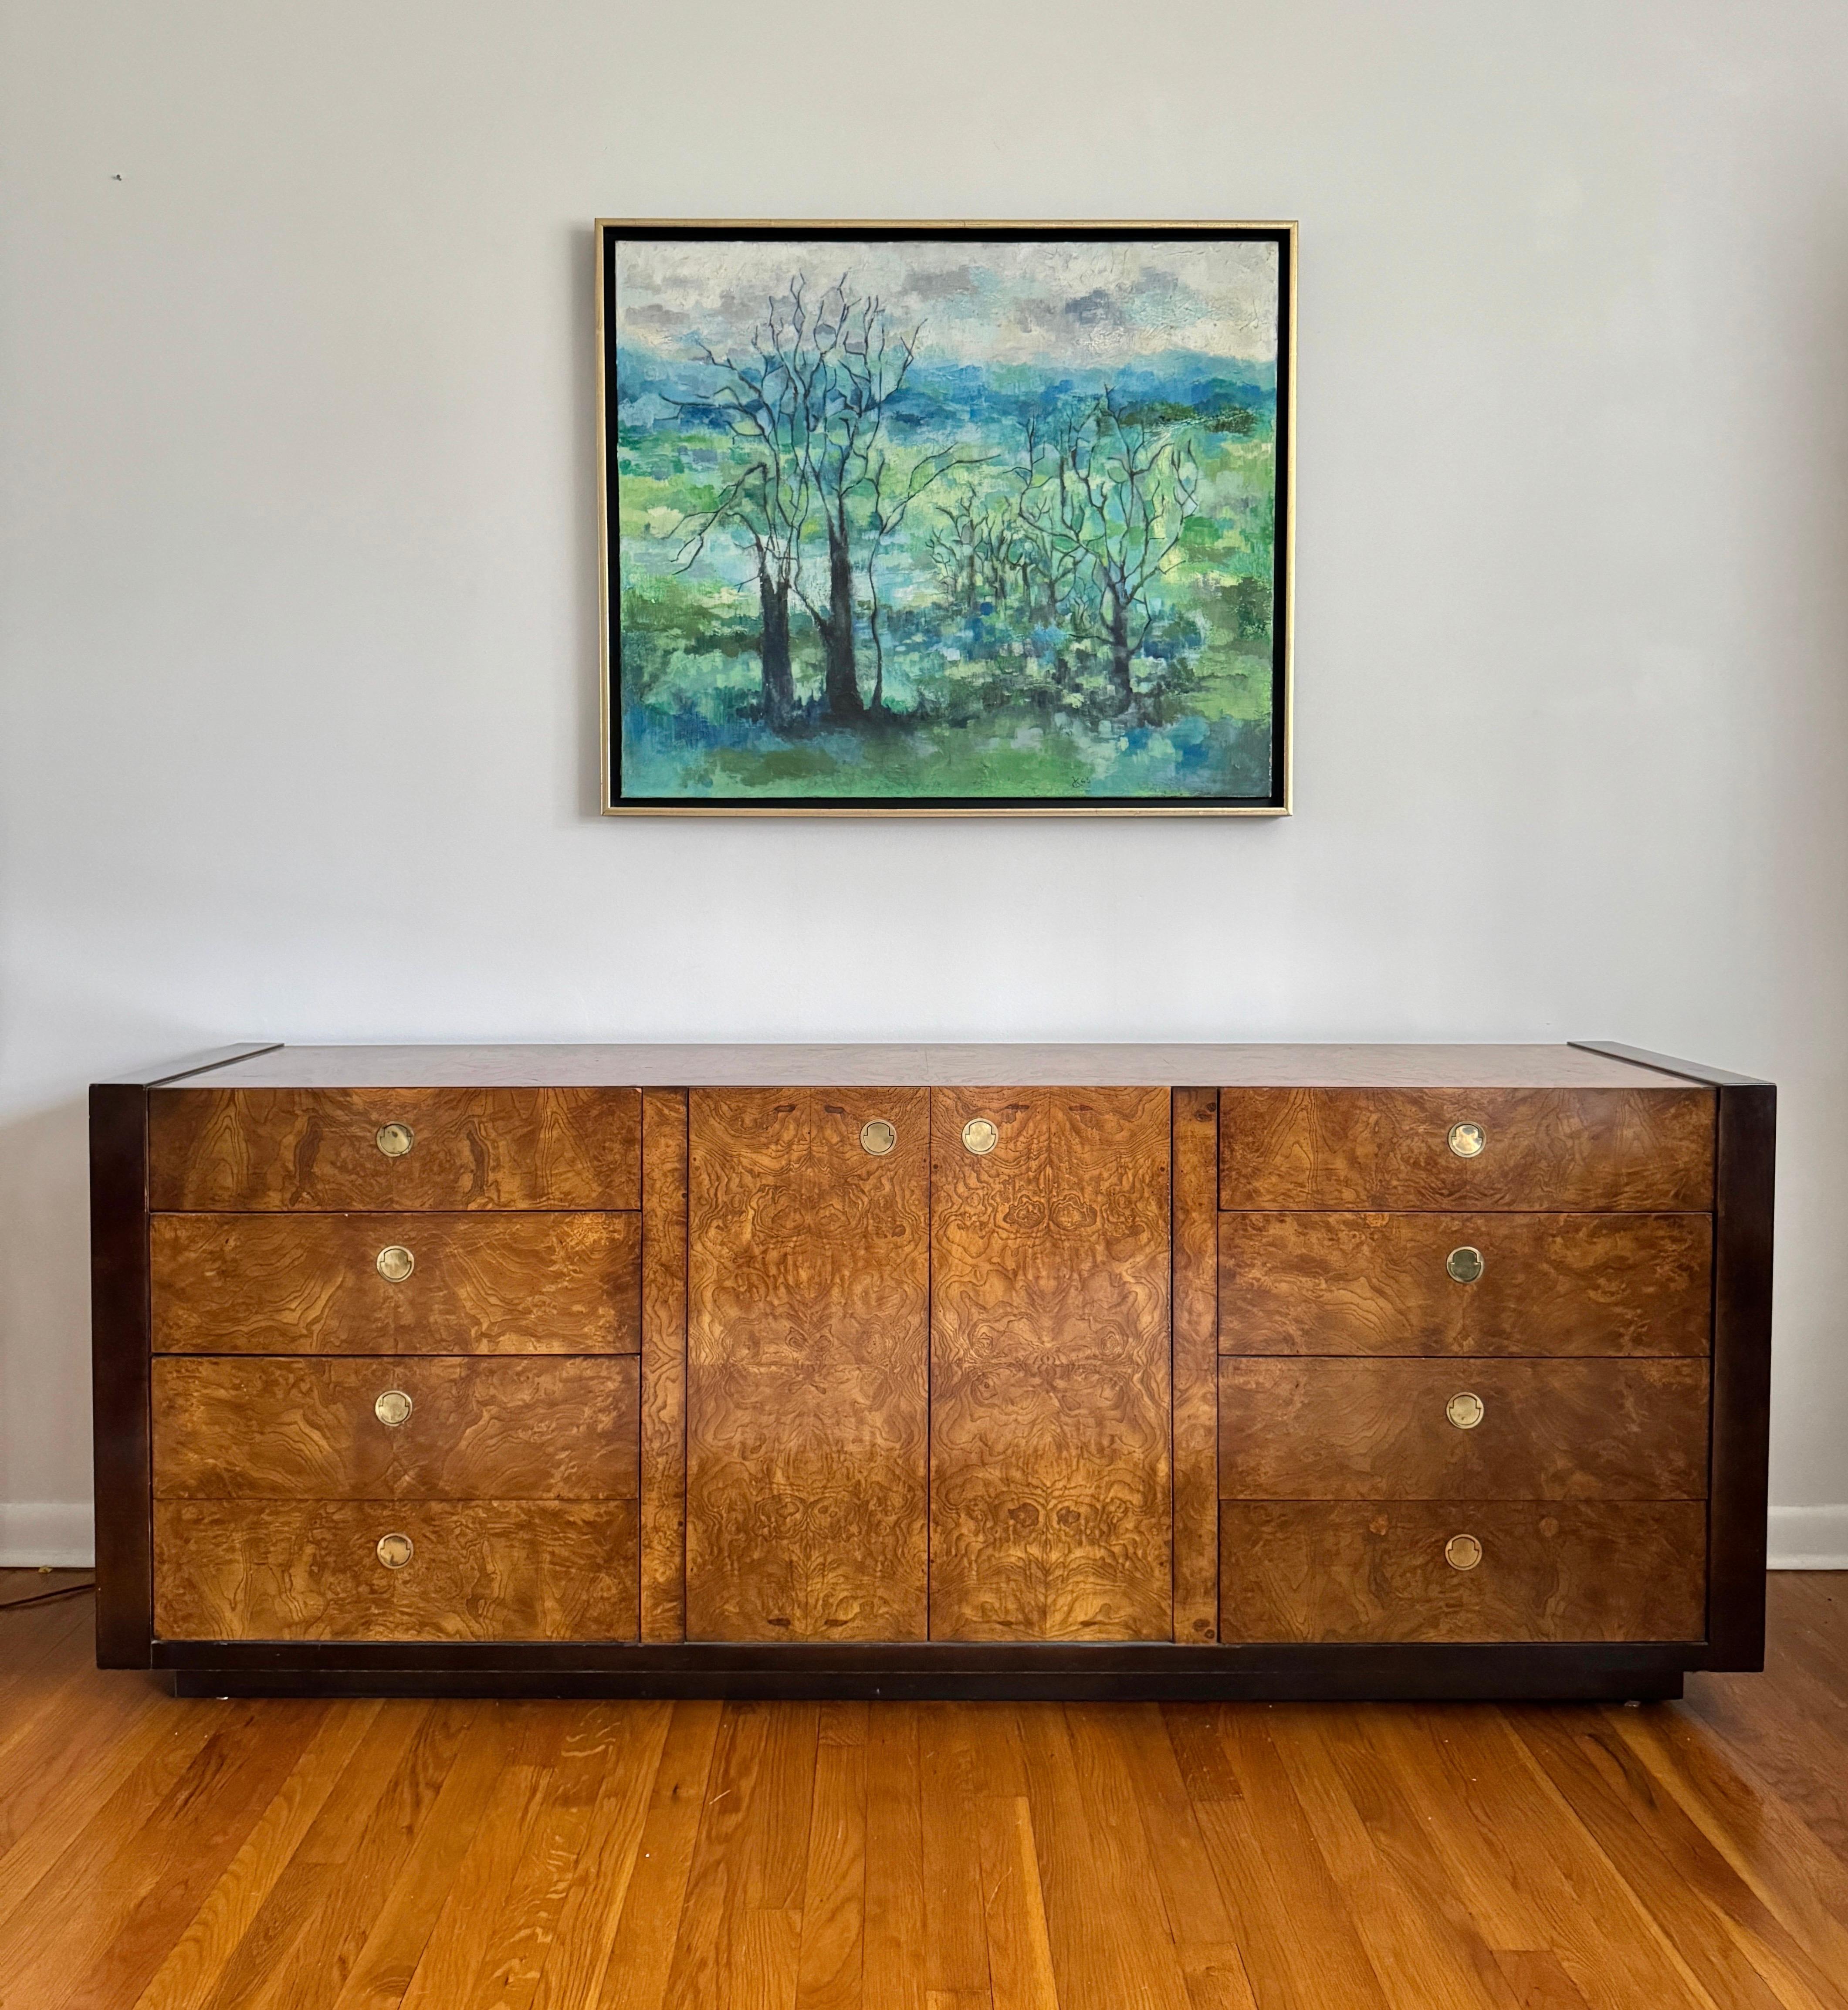 A Century Furniture dresser crafted from burl wood and mahogany with brass handles, featuring 12 spacious interior drawers.